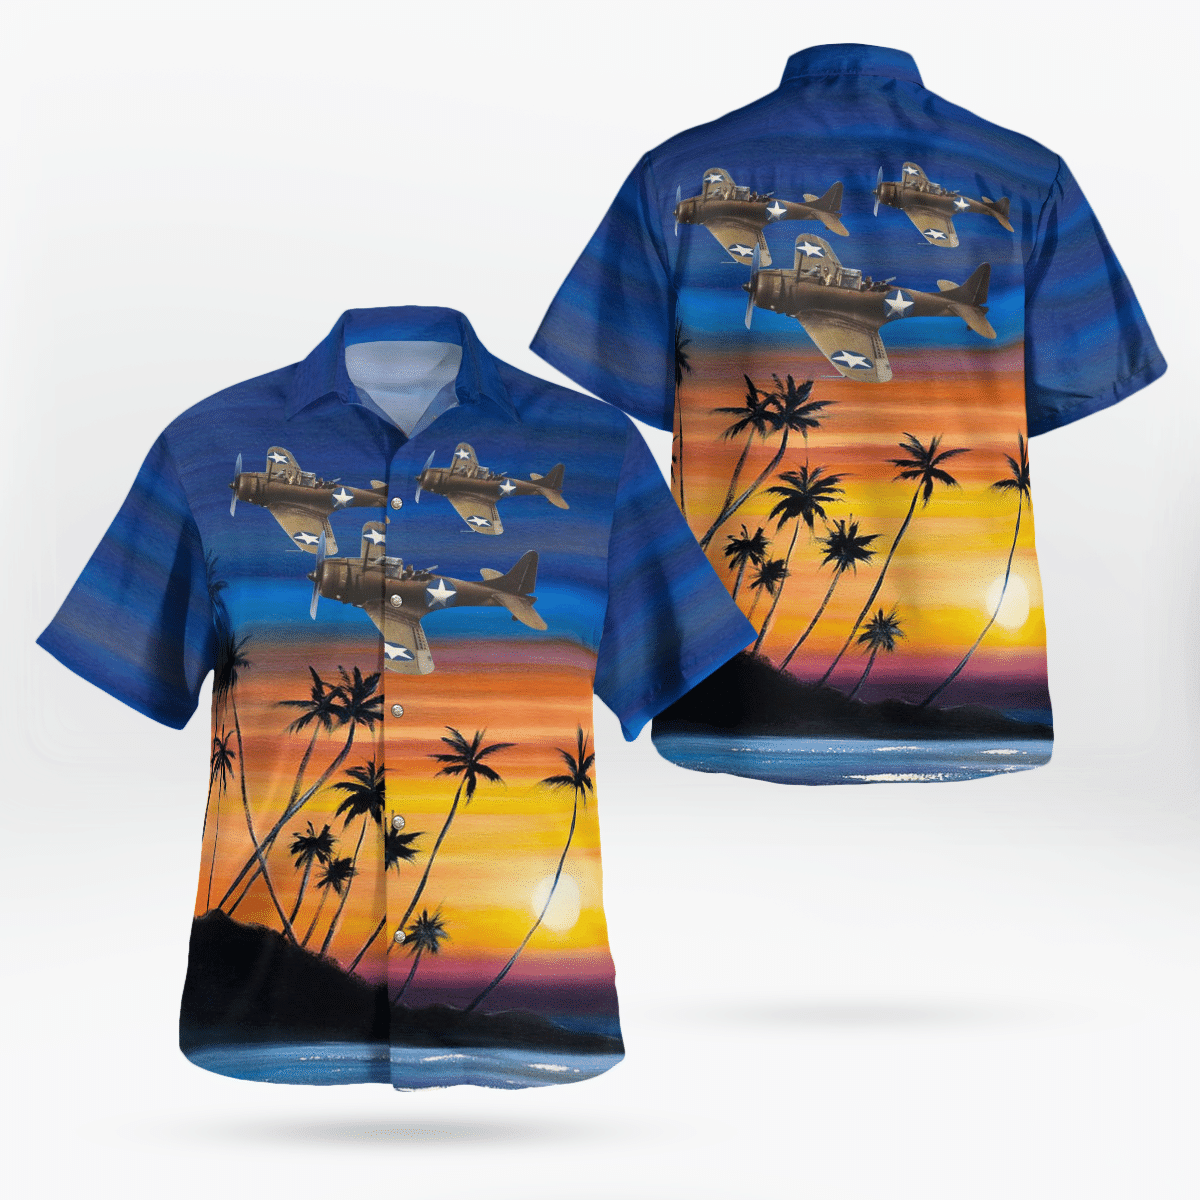 Shop now to find the perfect Hawaii Shirt for your hobby 94